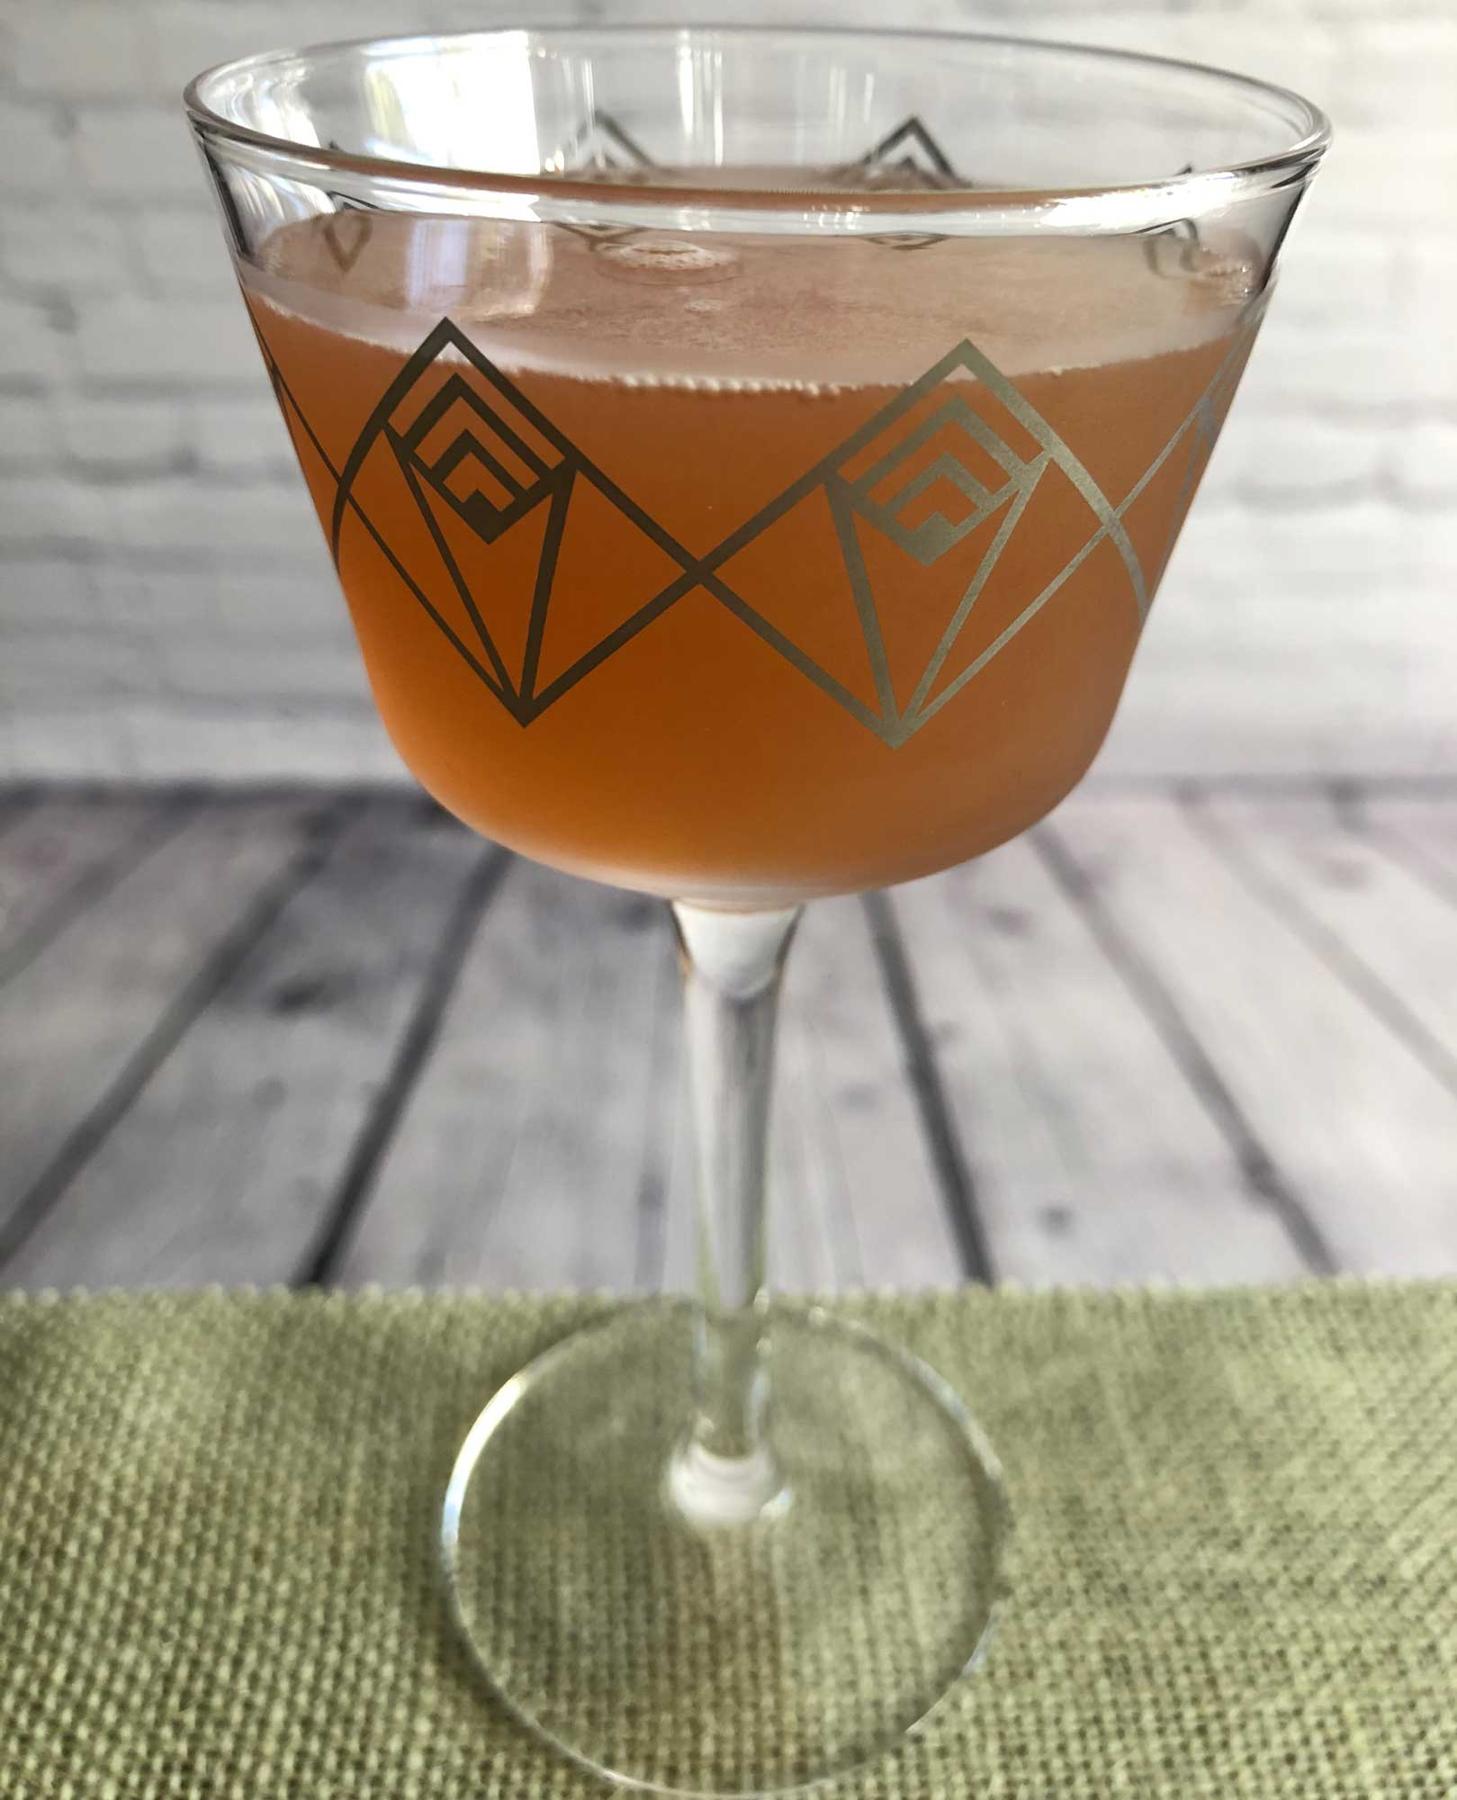 An example of the Demeter, the mixed drink (drink), adapted from the Persephone, PDT Cocktail Book, featuring applejack, Dolin Rouge Vermouth de Chambéry, Hayman’s Sloe Gin, lemon juice, and simple syrup; photo by Lee Edwards